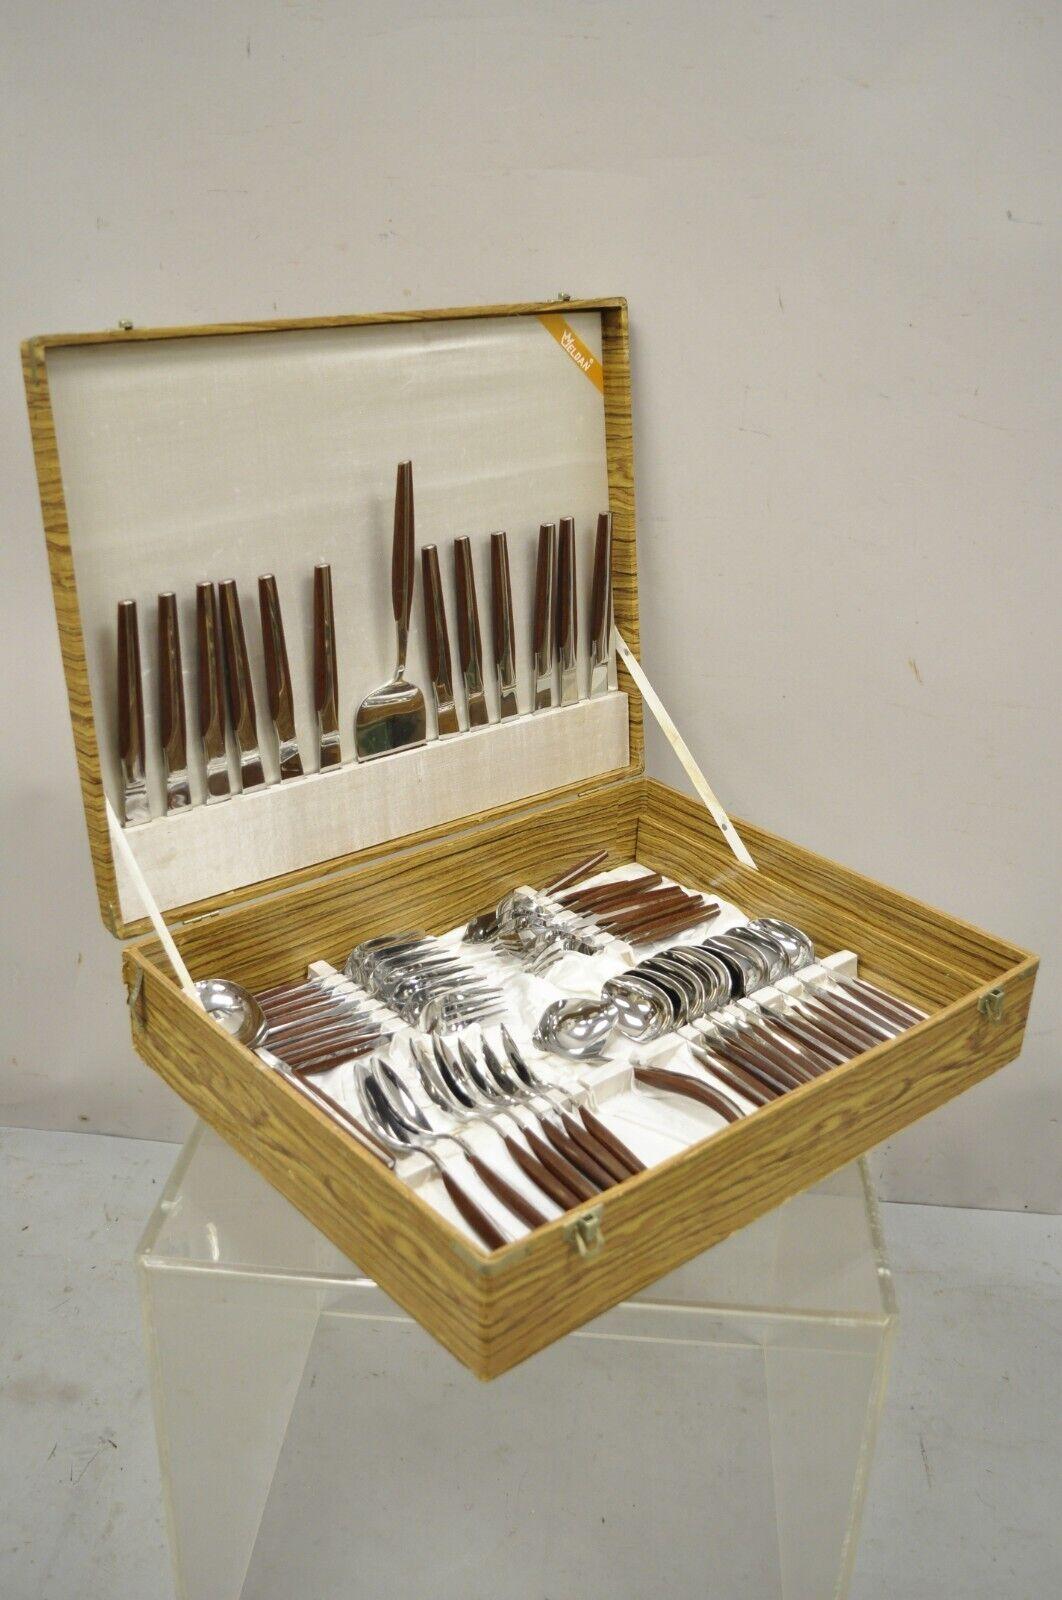 Vintage Eldan Japan ELD 2 brown stainless steel flatware set Svc for 12 - 105 pc. Item includes service for 12, 105 total pieces, 2 layers, original box, original label. Circa mid to late 20th century. Measurements: Box: 4